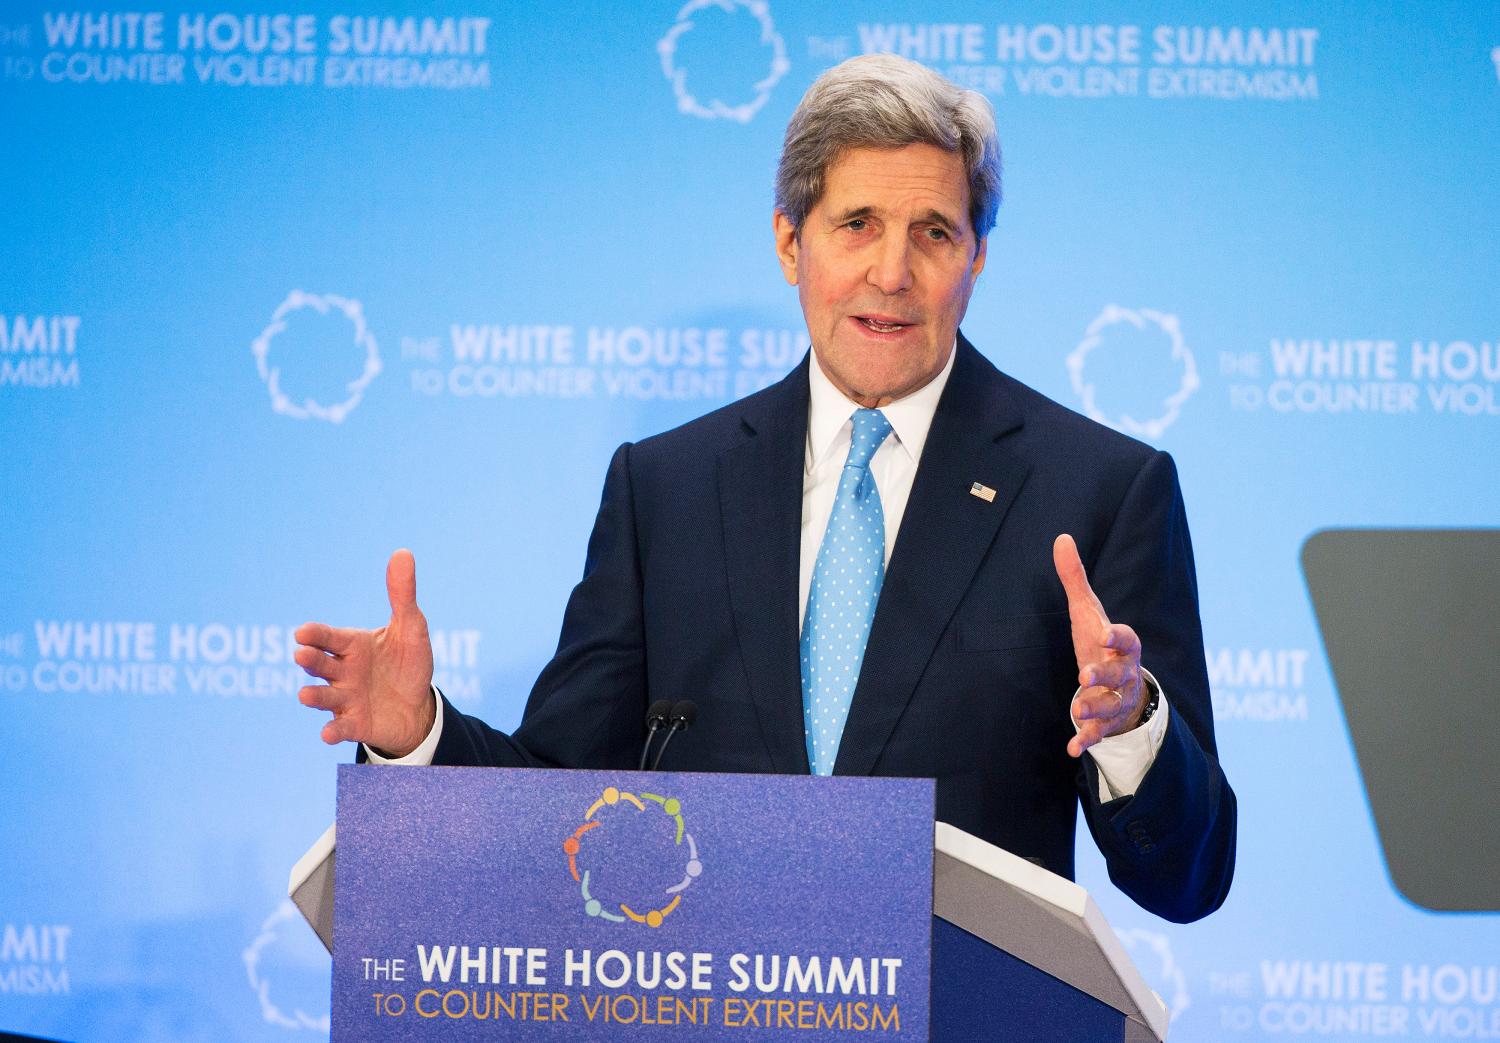 Secretary of State John Kerry participates in the White House Summit on Countering Violent Extremism Foreign Fighter Ministerial at the State Department in Washington February 19, 2015. REUTERS/Joshua Roberts (UNITED STATES - Tags: POLITICS CRIME LAW RELIGION) - RTR4Q92X